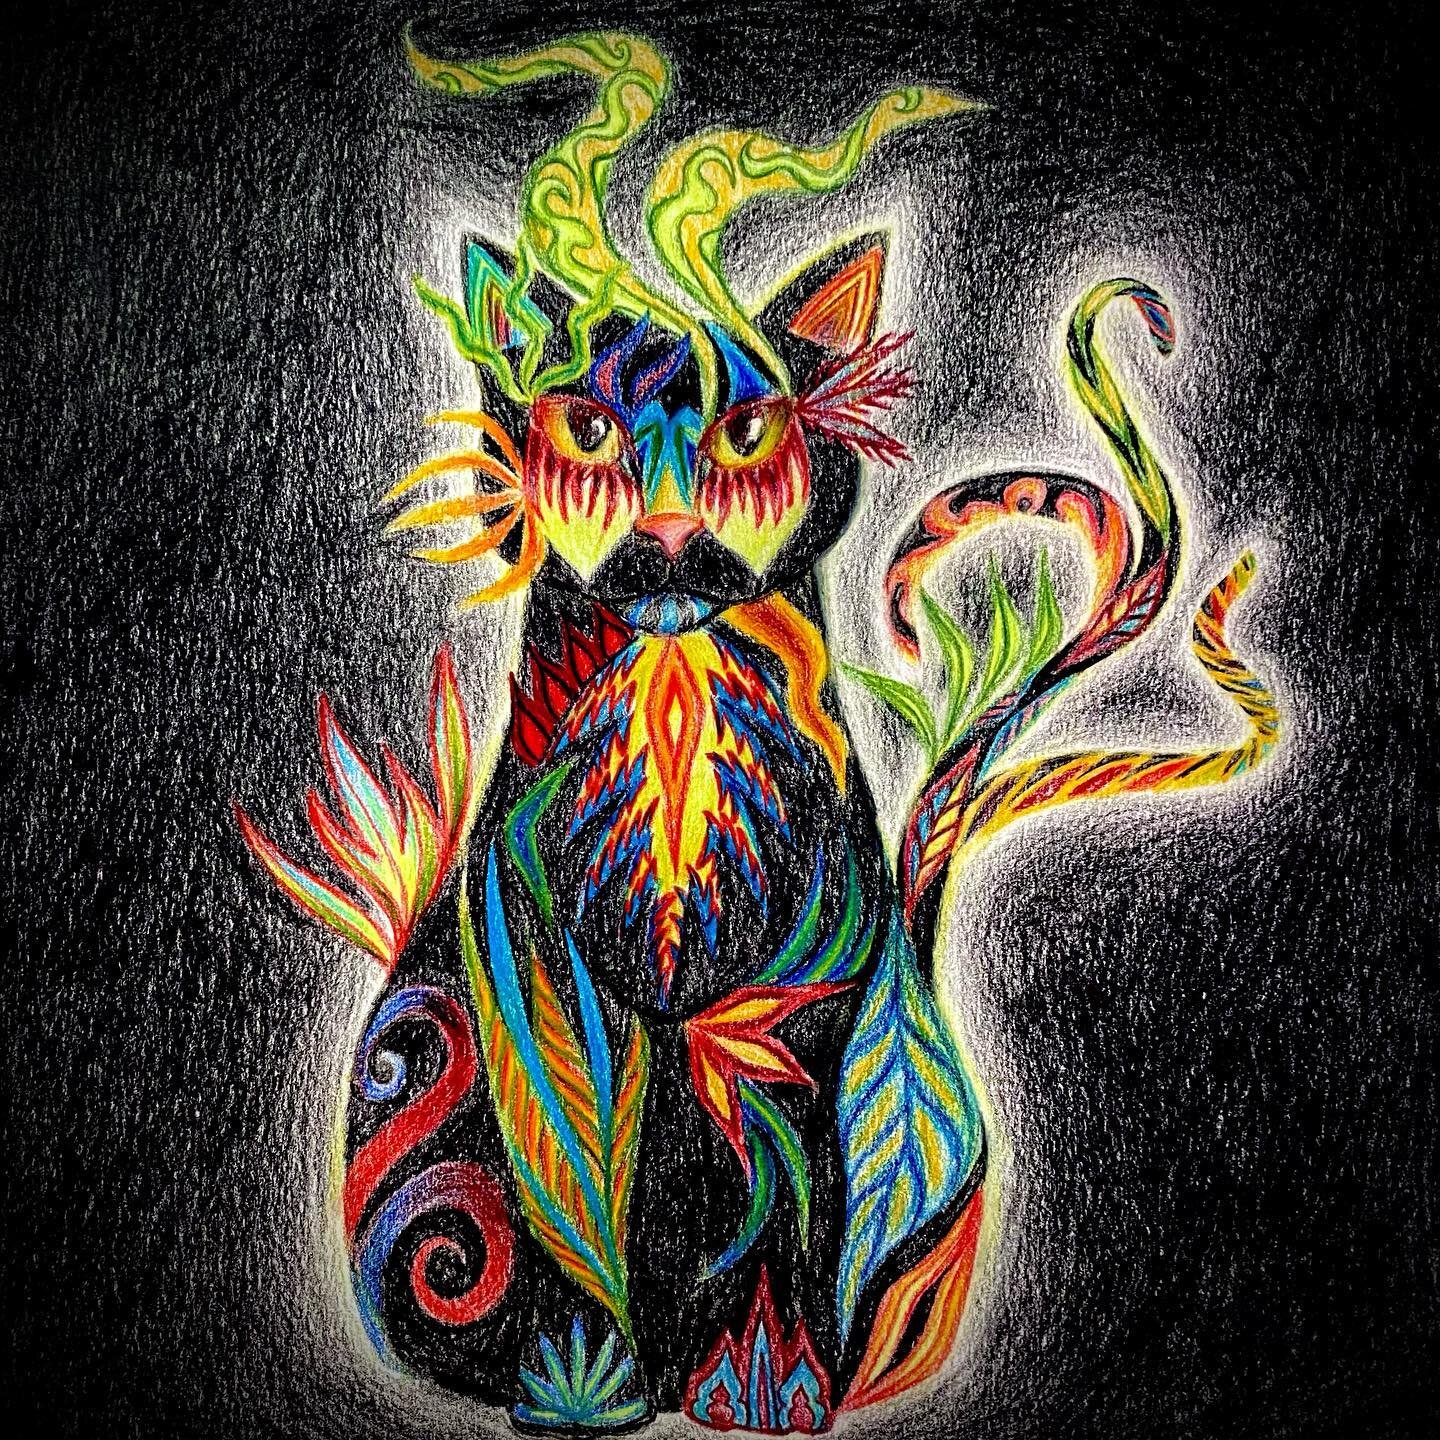 Psychic Kitty 🔮🐱gatekeeper of the infinite kitten dimension🎇♾🌀knows your fears, knows your future 
Black or white??